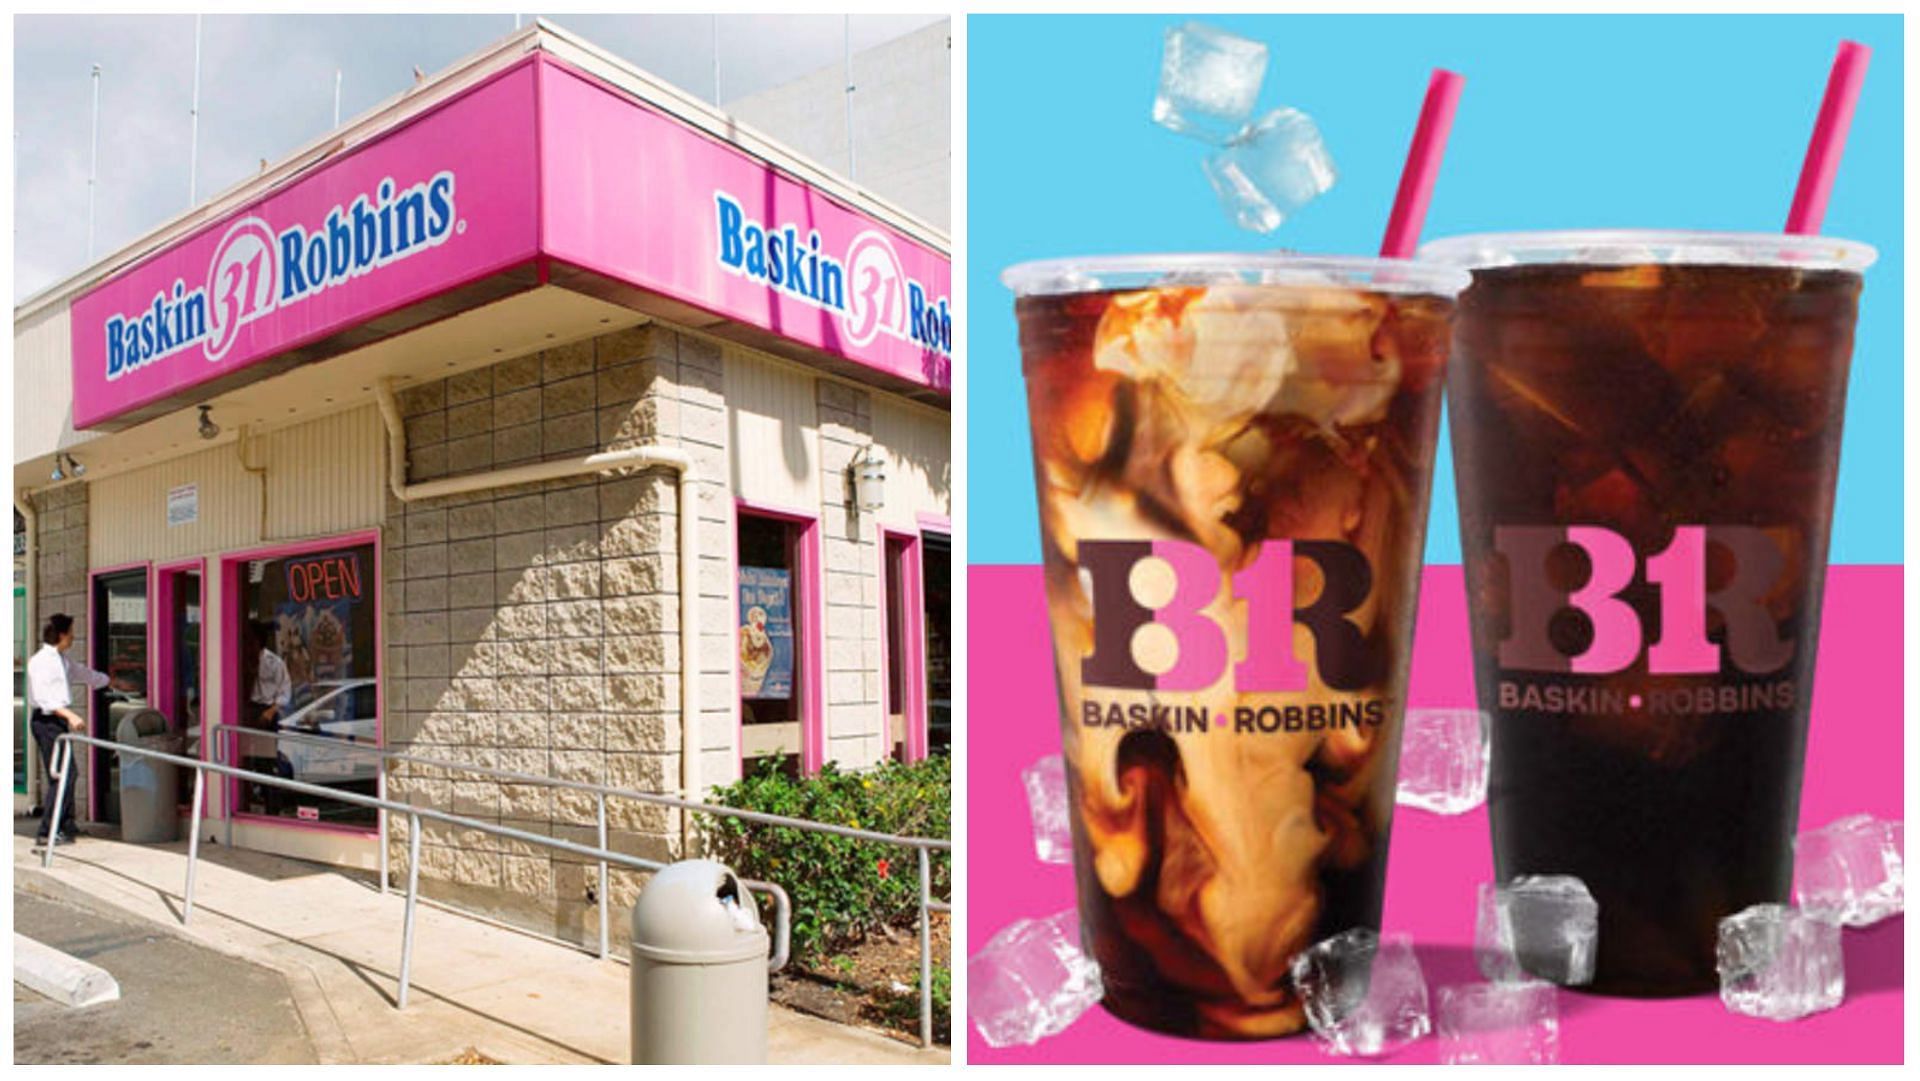 A newly released Iced Cold Brew from Baskin-Robbins! (Image via Baskin-Robbins)